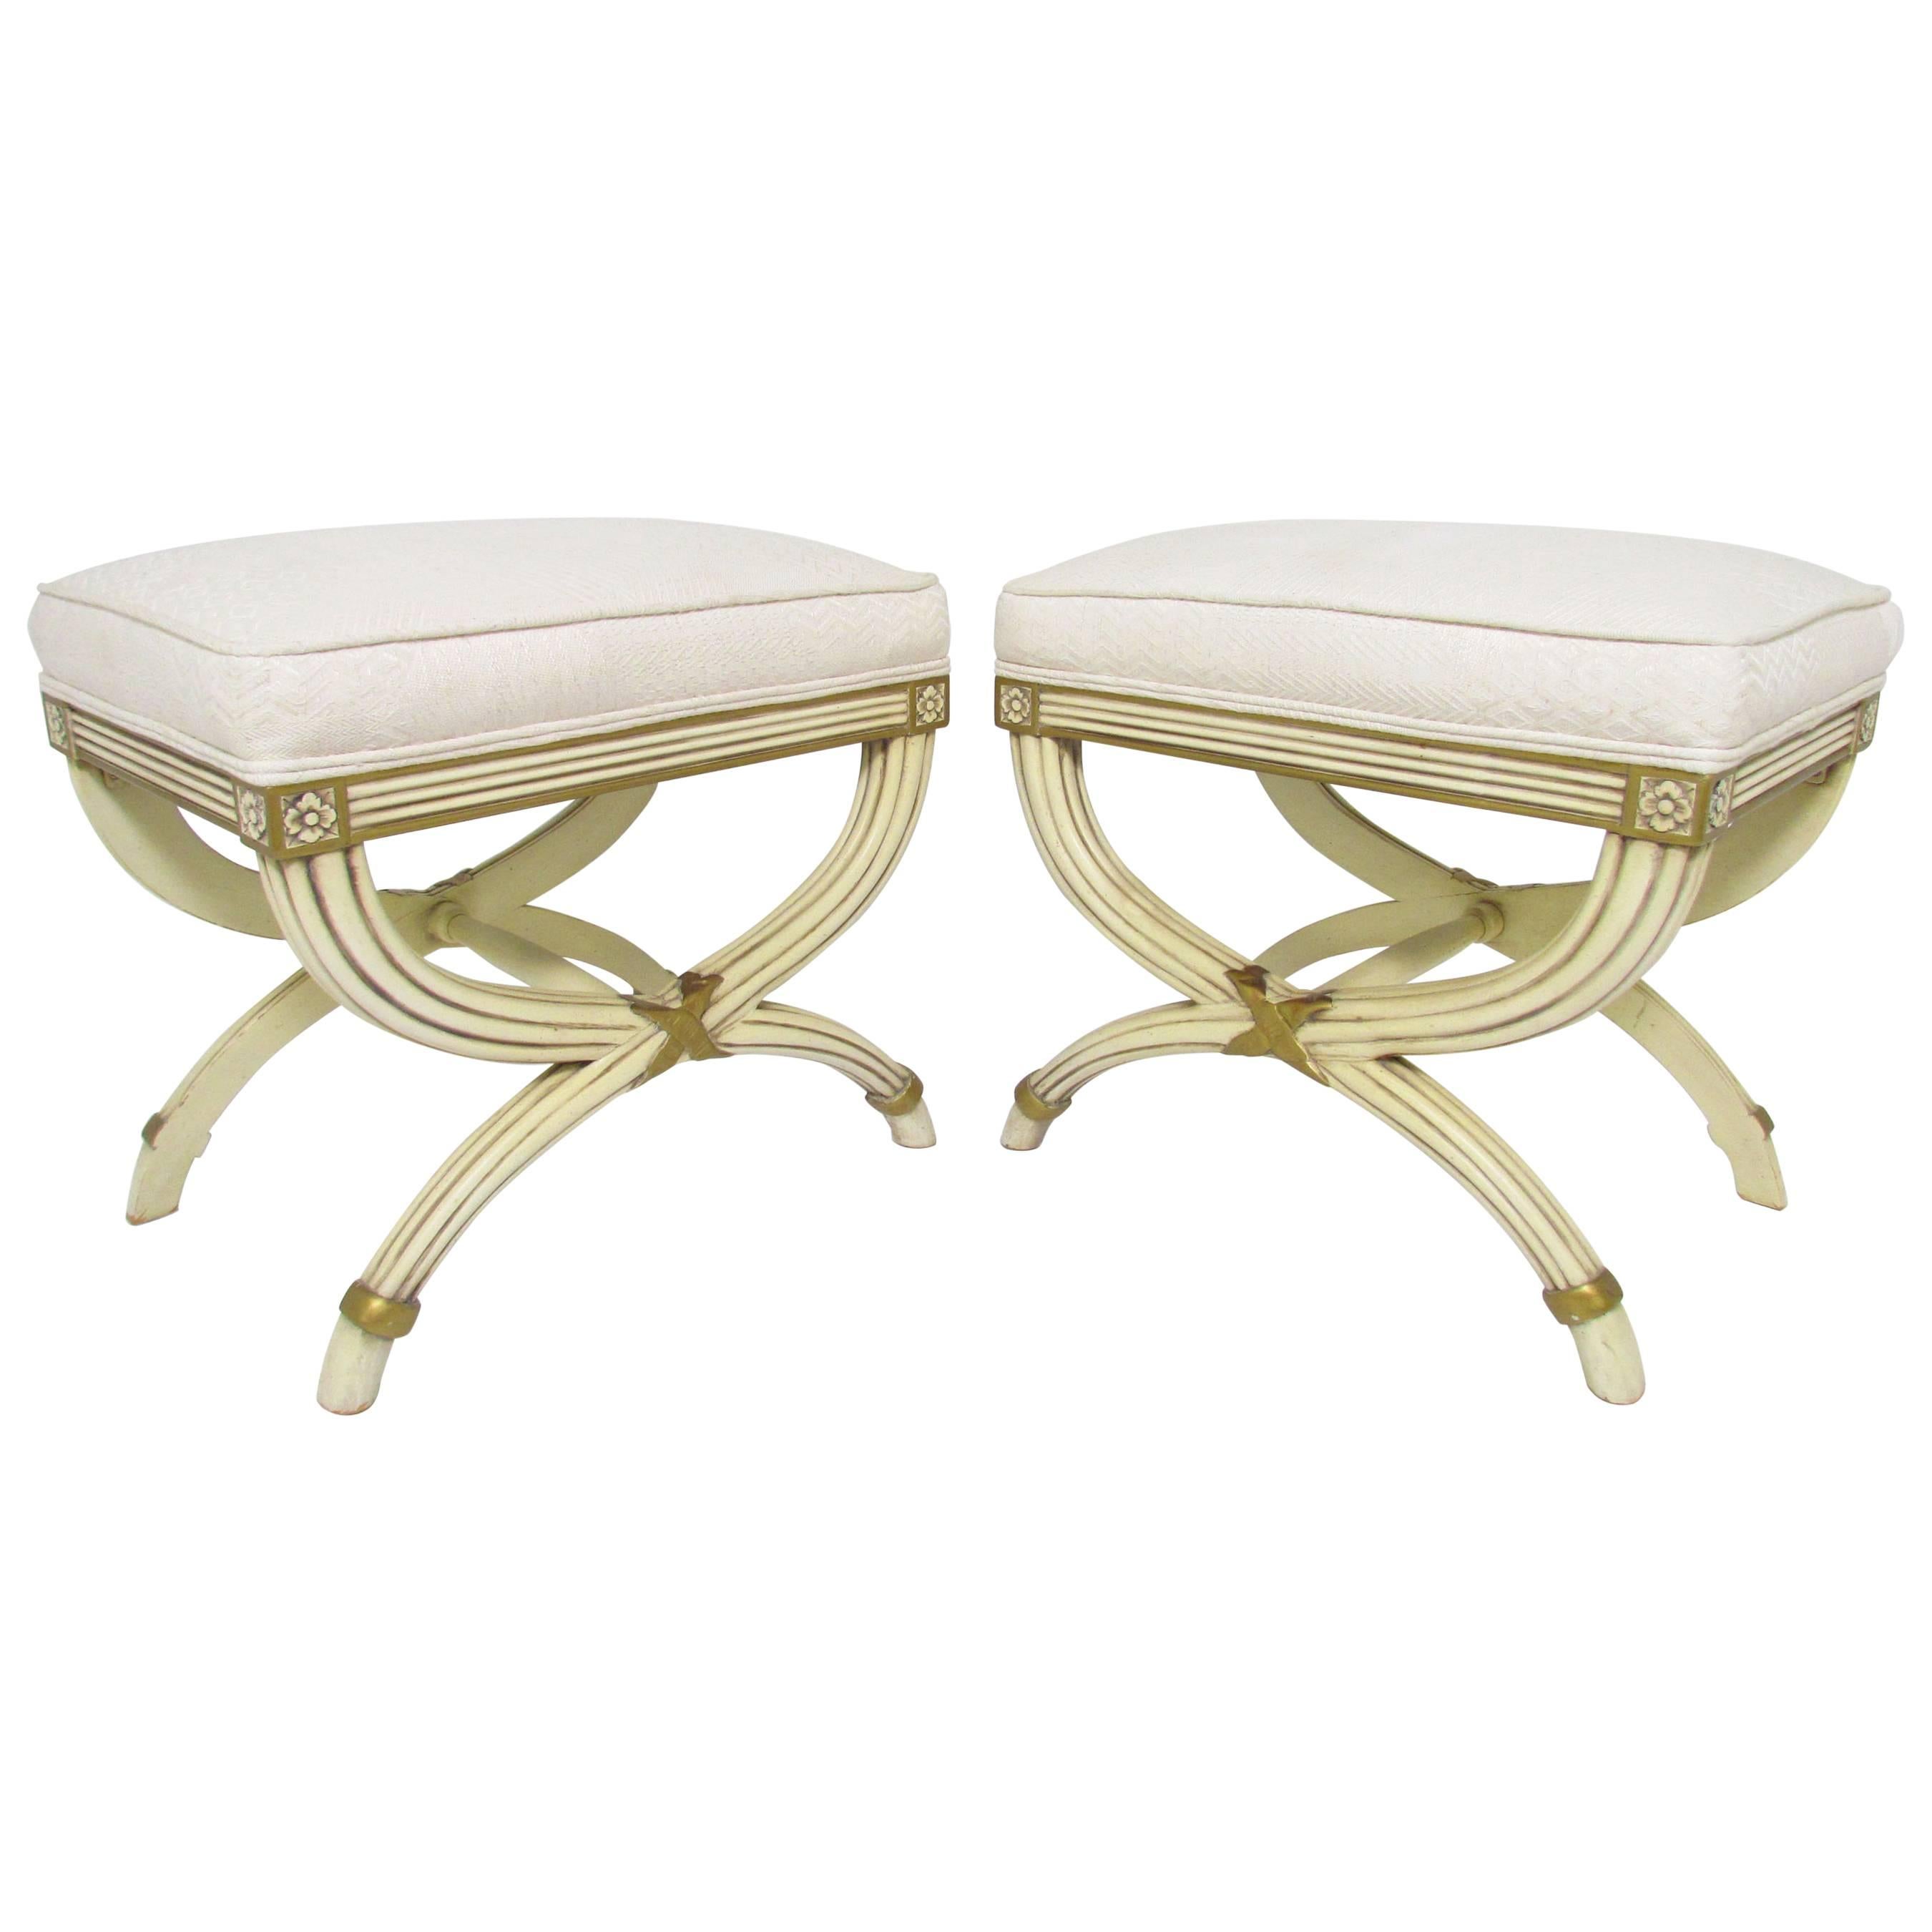 Pair of Hollywood Regency Style X-Base Stools by Karges Furniture